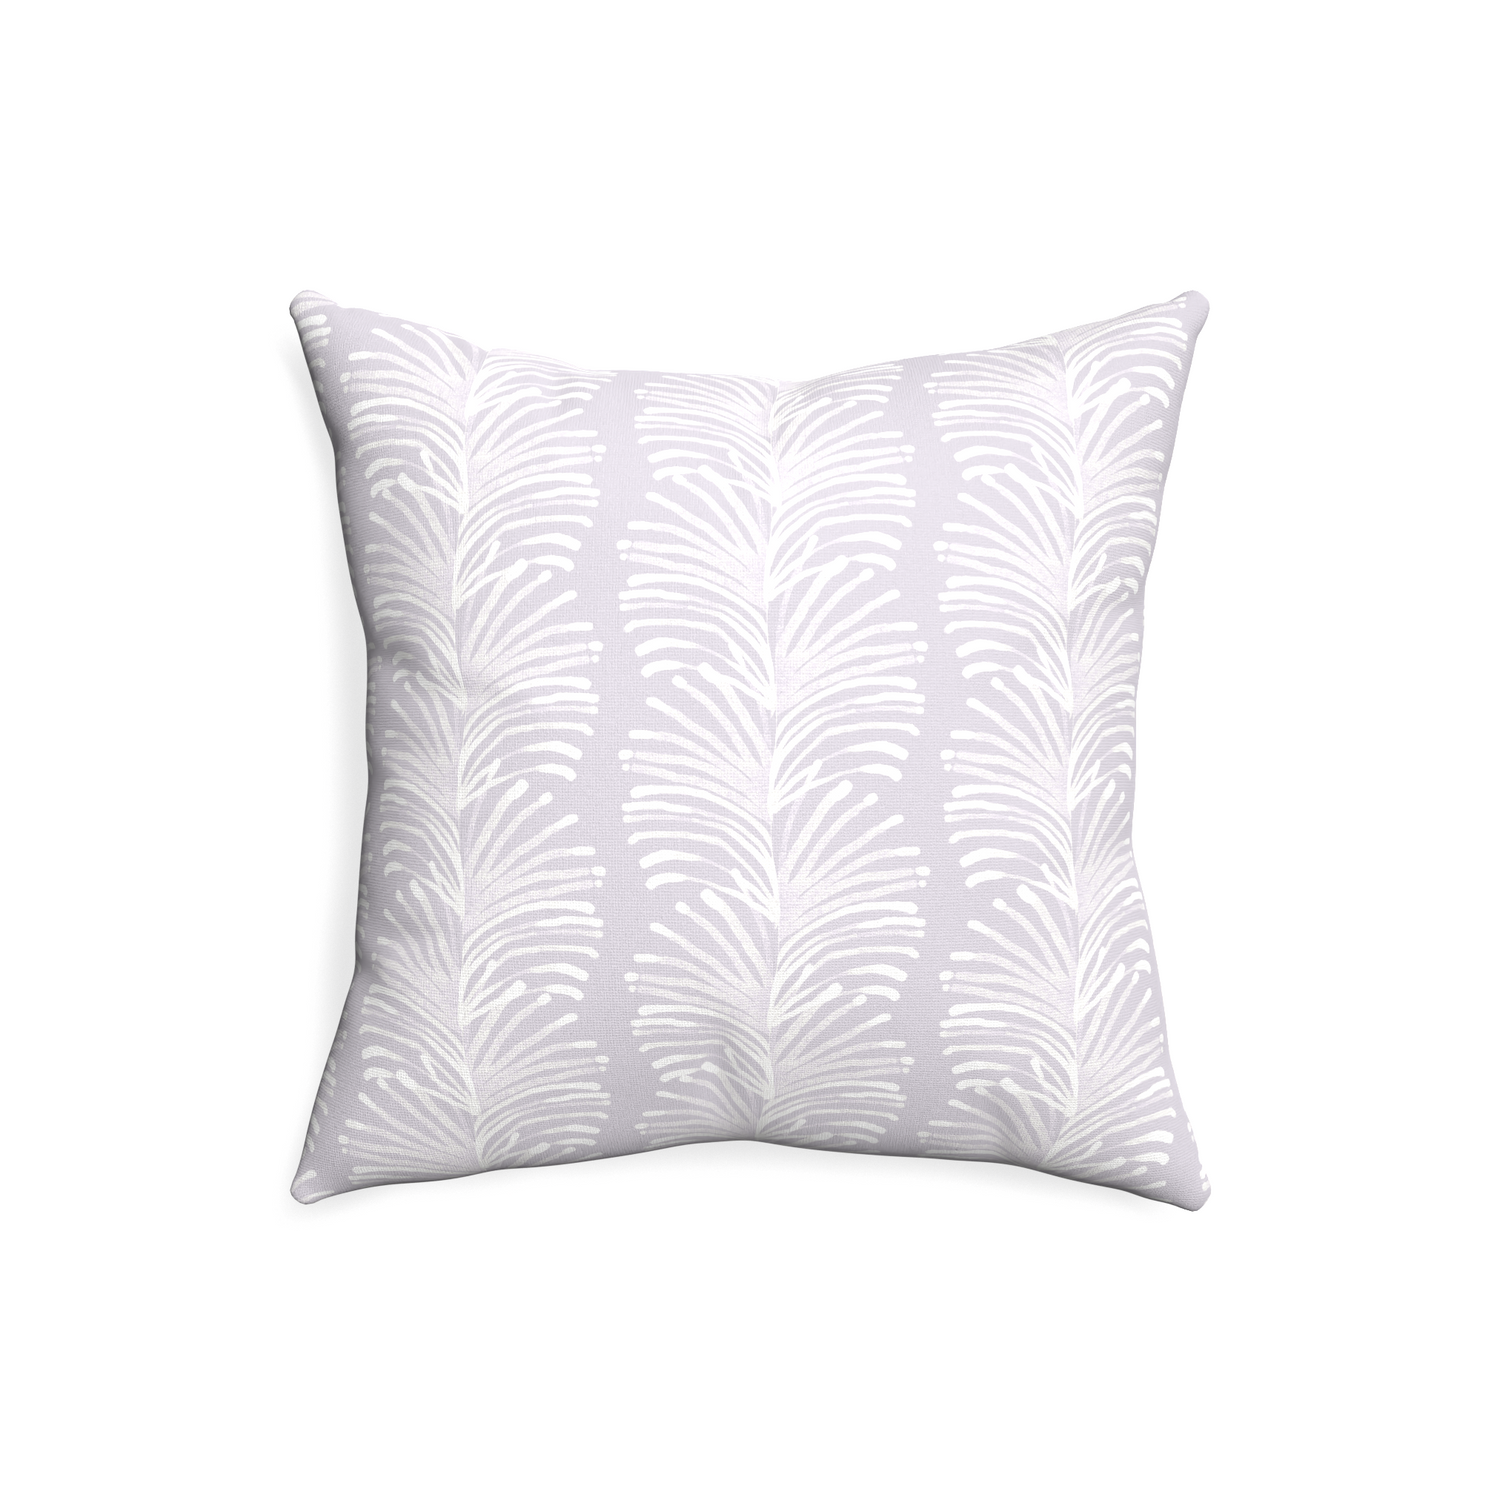 20-square emma lavender custom pillow with none on white background